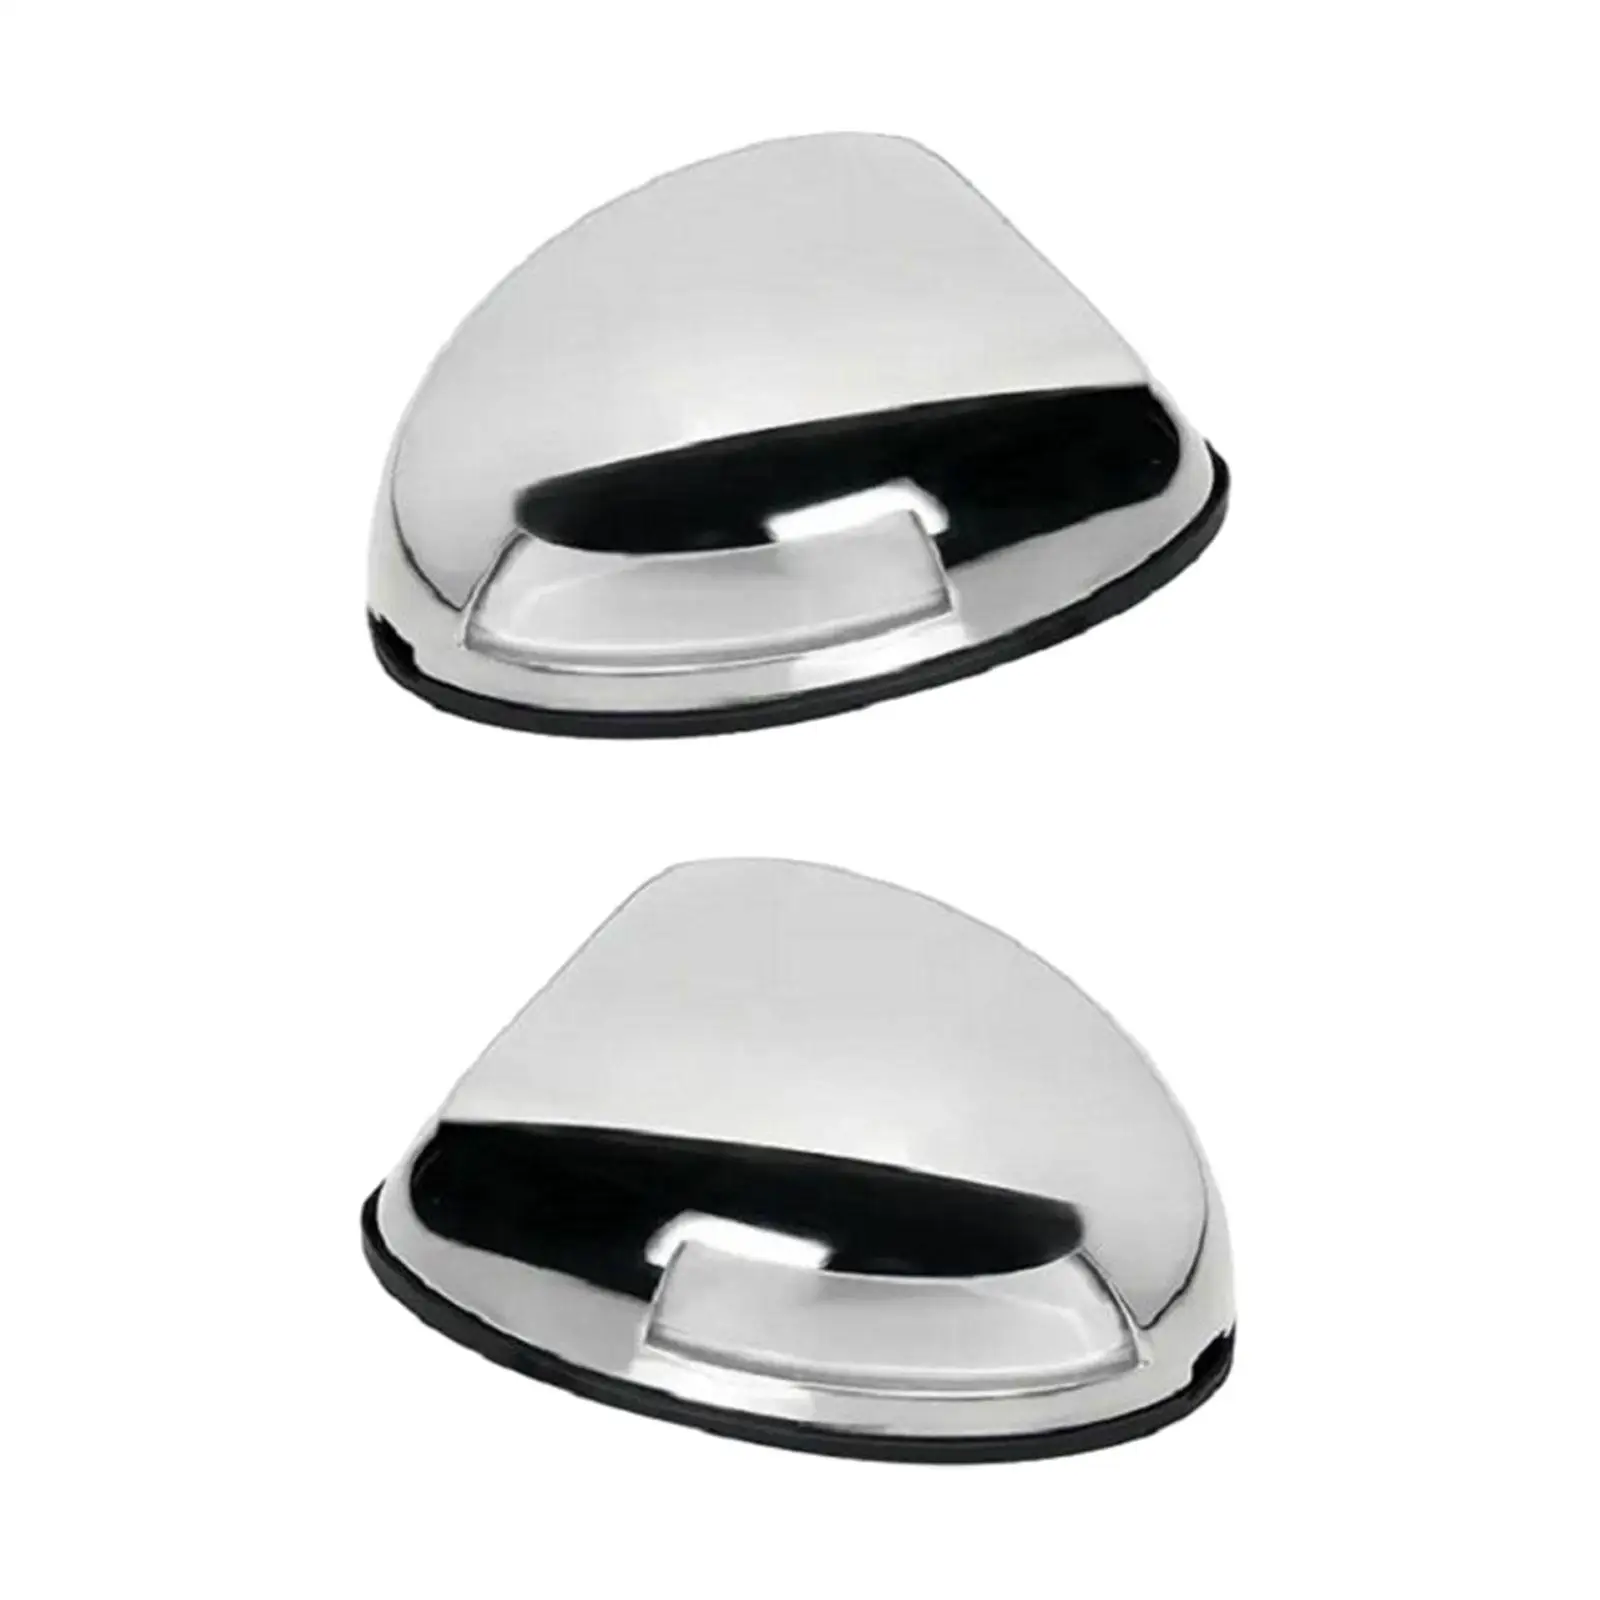 

2 Pieces Marine Navigation Light IP66 Waterproof LED Lamp for Fishing Boats Port Marine Boat Yacht Easy to Install Repair